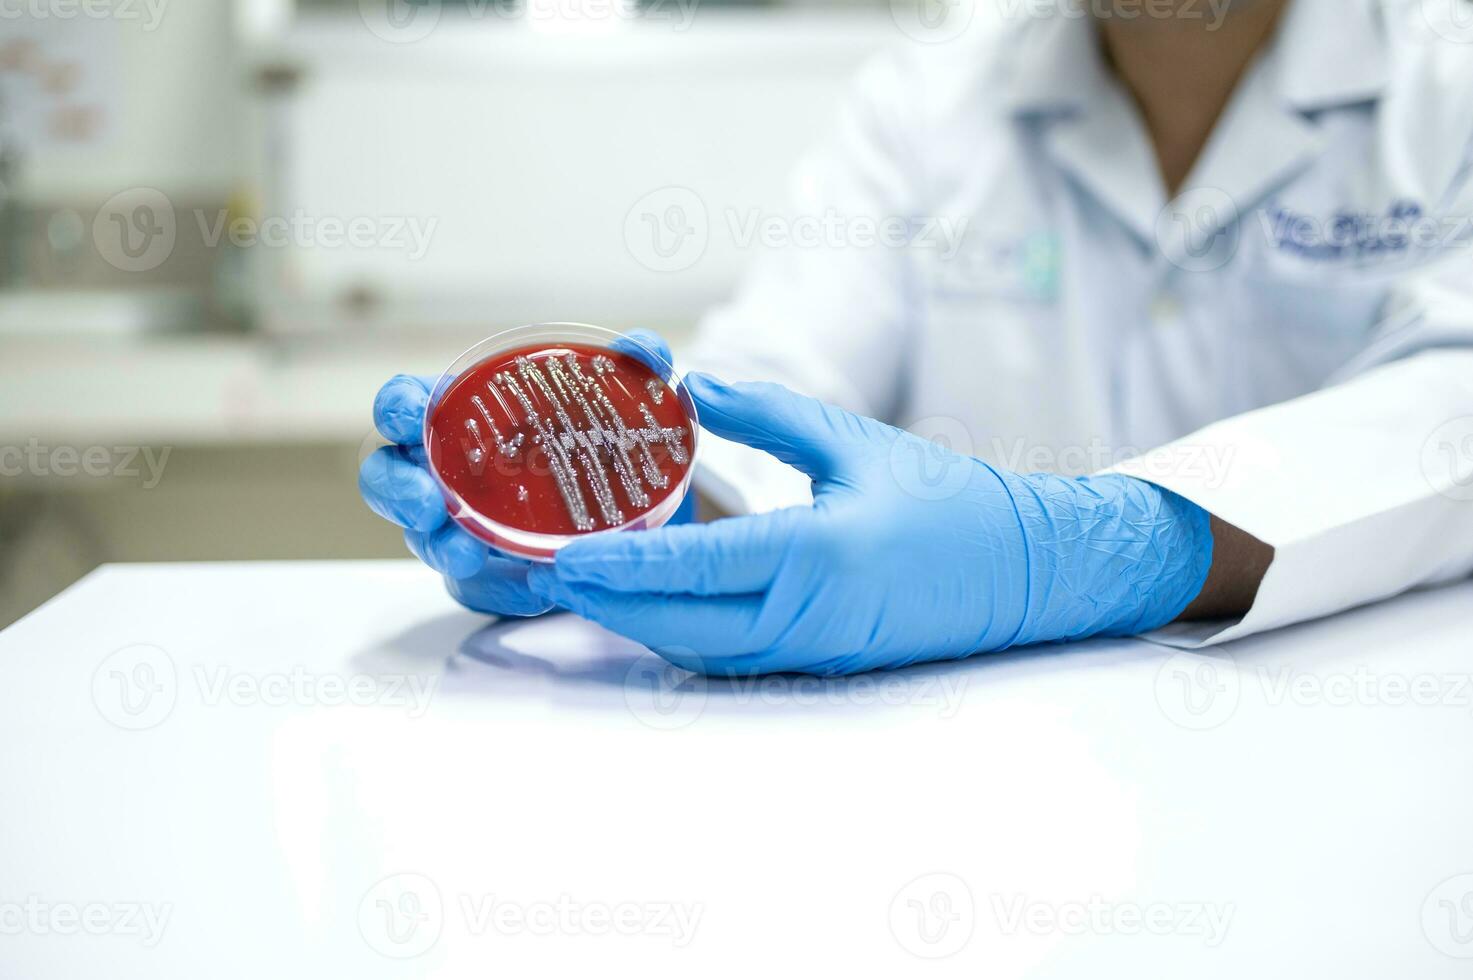 Doctor holding white bacteria on blood agar in hospital microbiology department bacteria identification photo